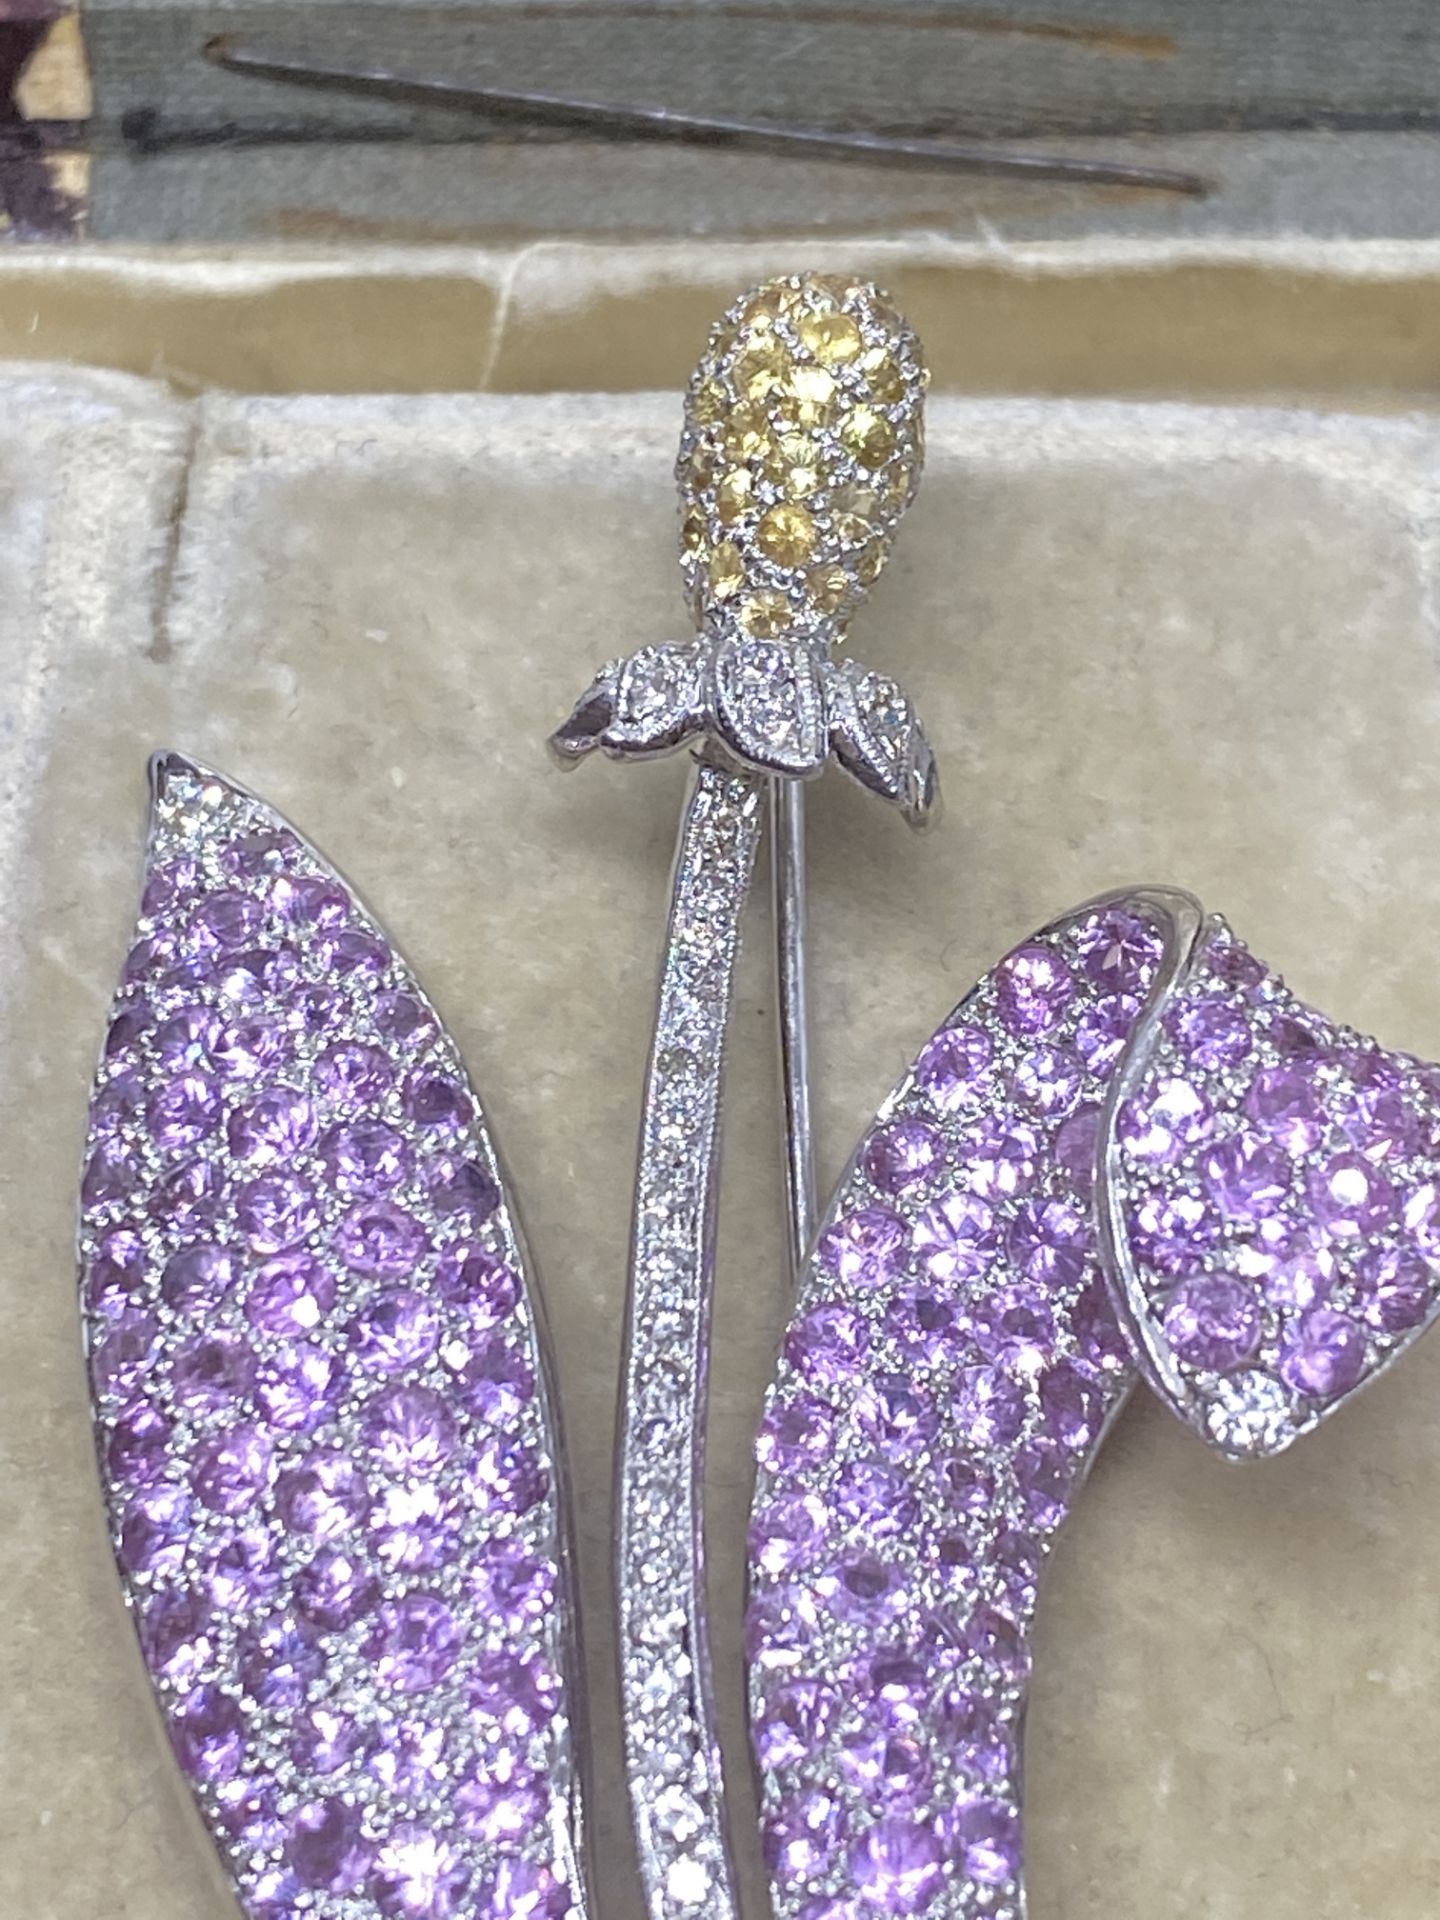 18ct WHITE GOLD PINK SAPPHIRE & DIAMOND FLOWER BROOCH - Image 3 of 6